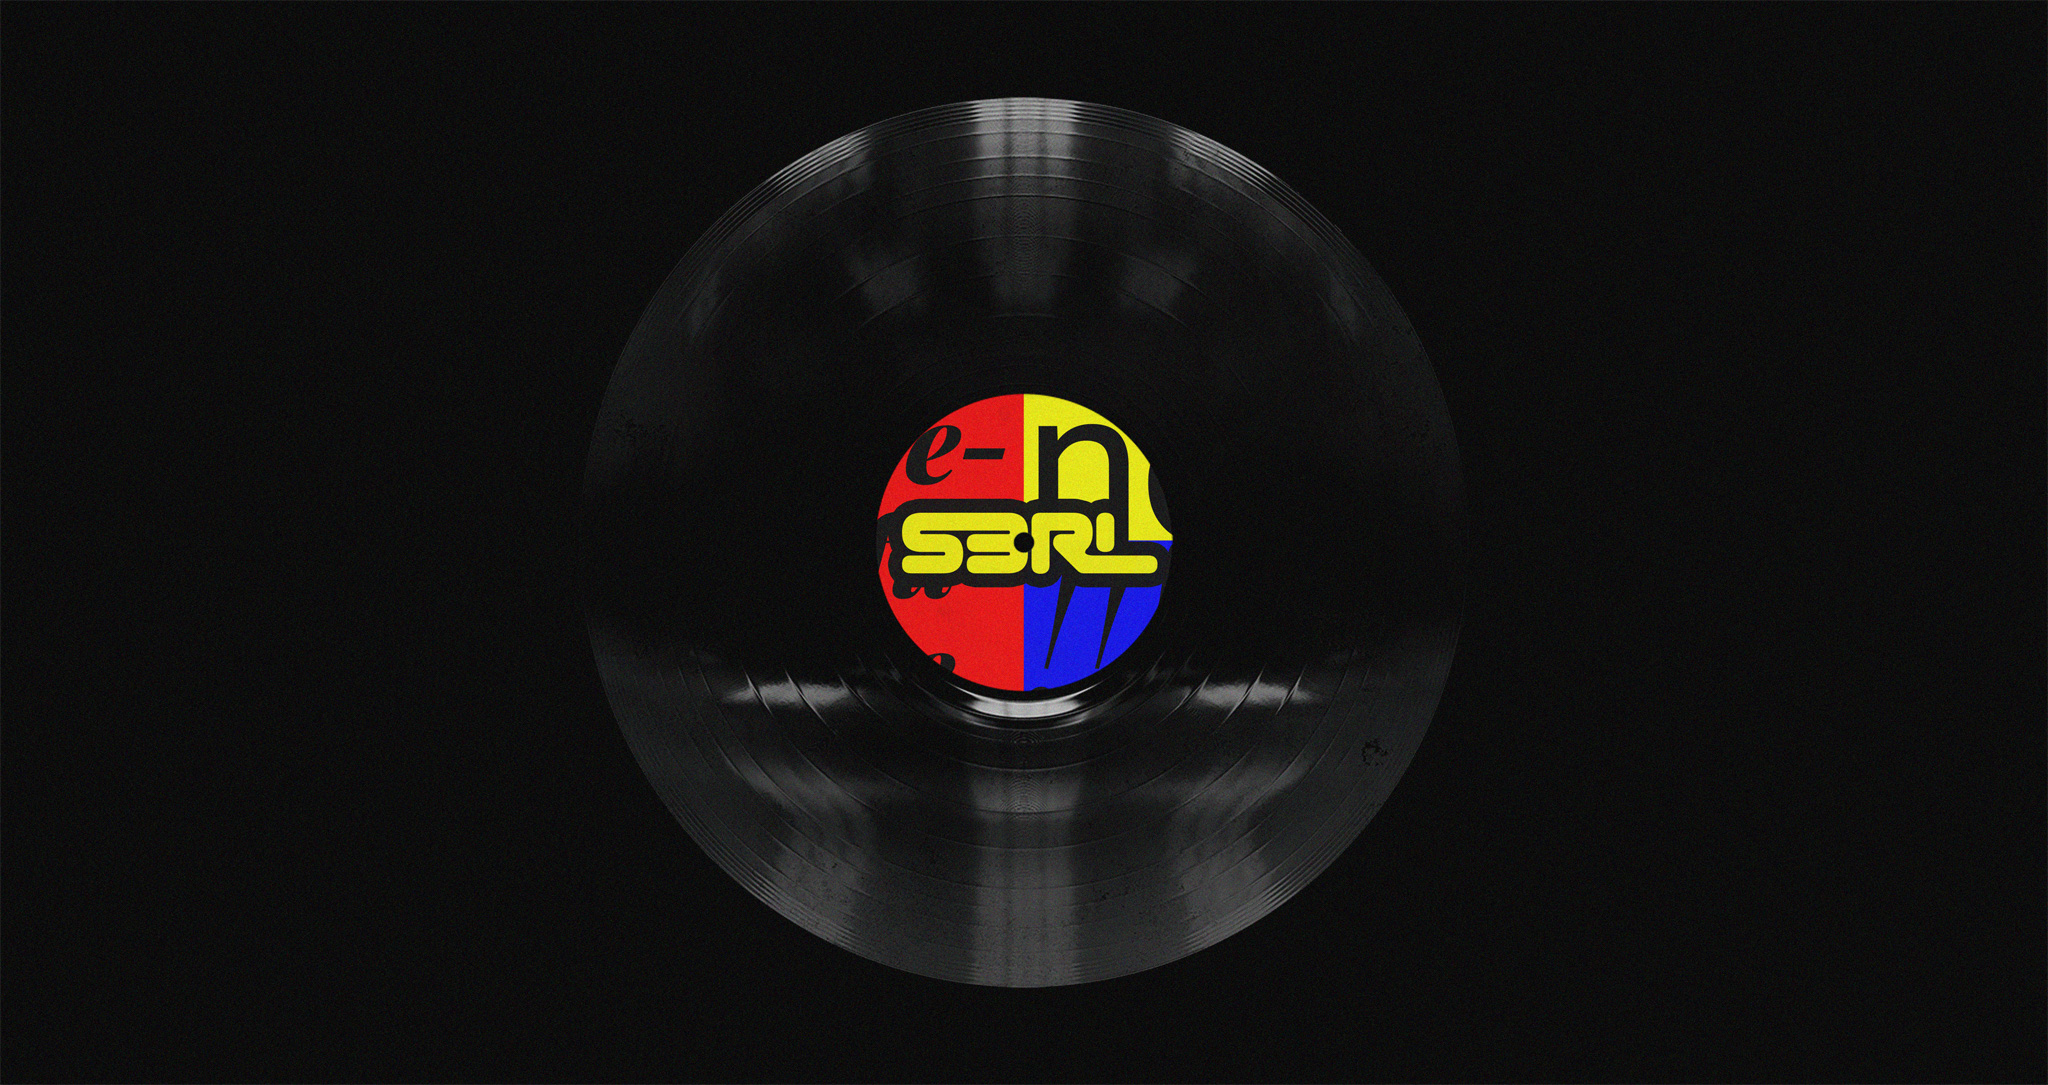 Graphic featuring the S3RL logotype in an RBY and black color scheme, as a label on a vinyl disc.